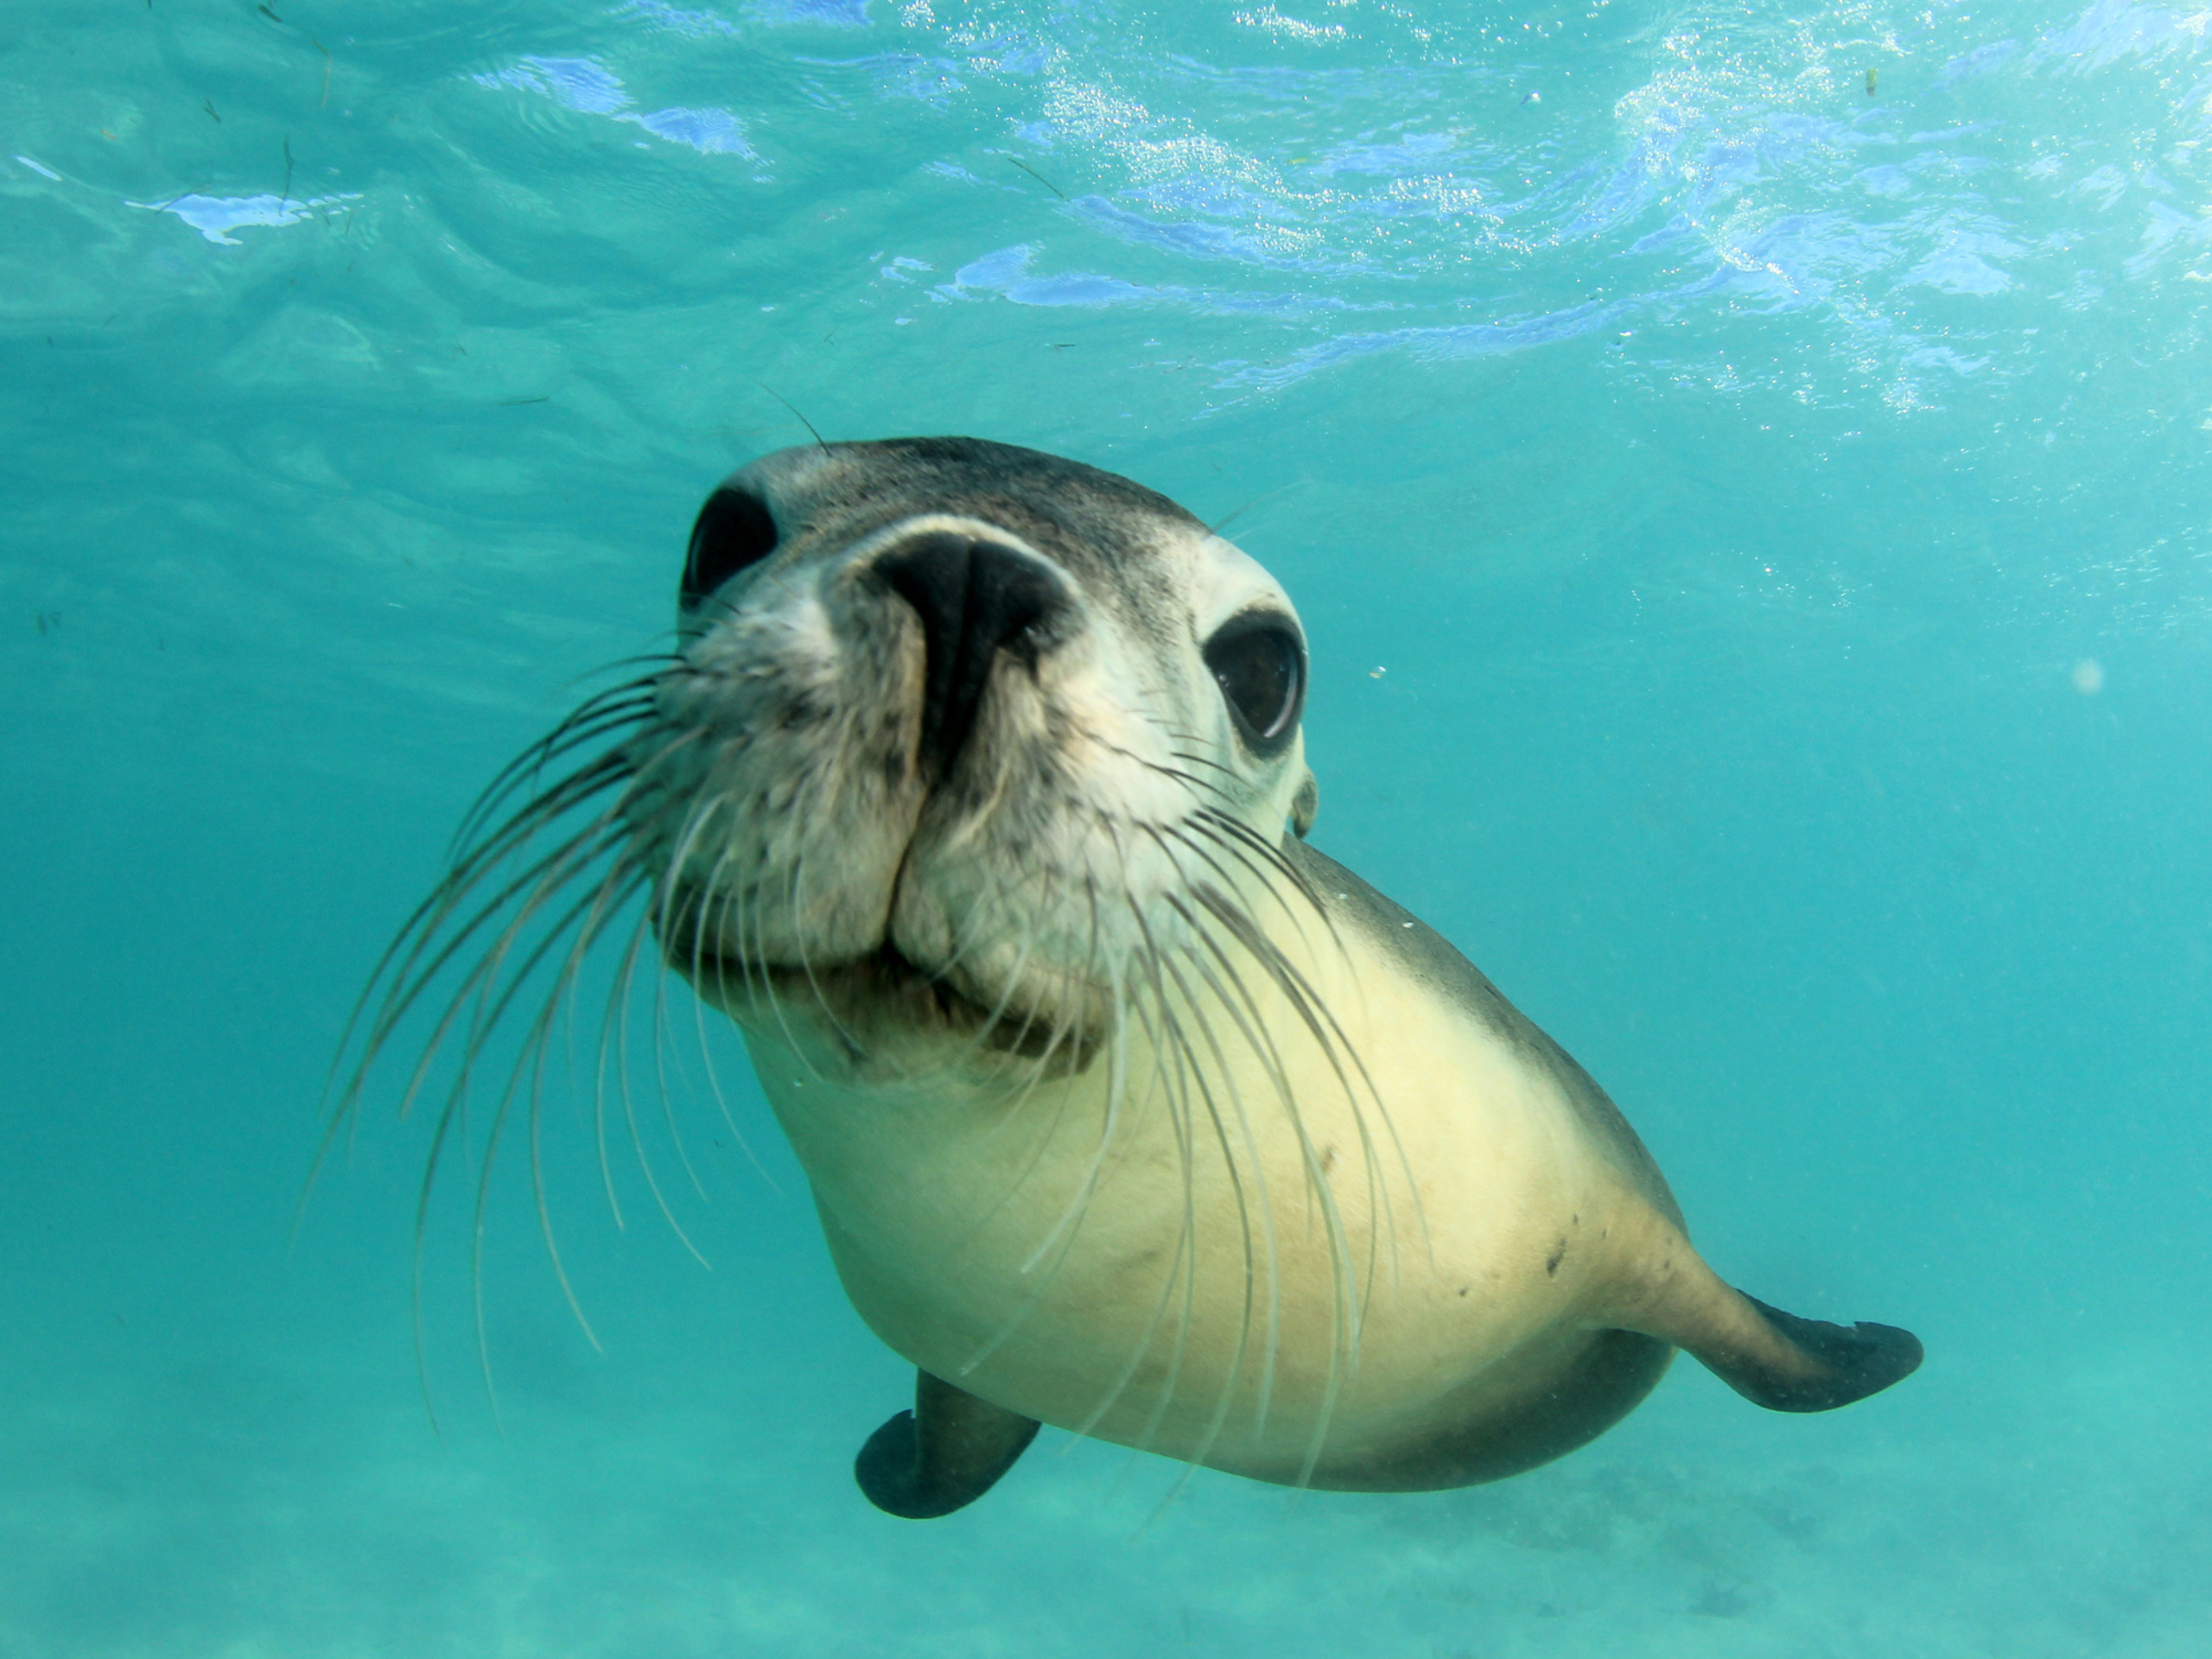 A close up image of a seal in the water looking at the camera.